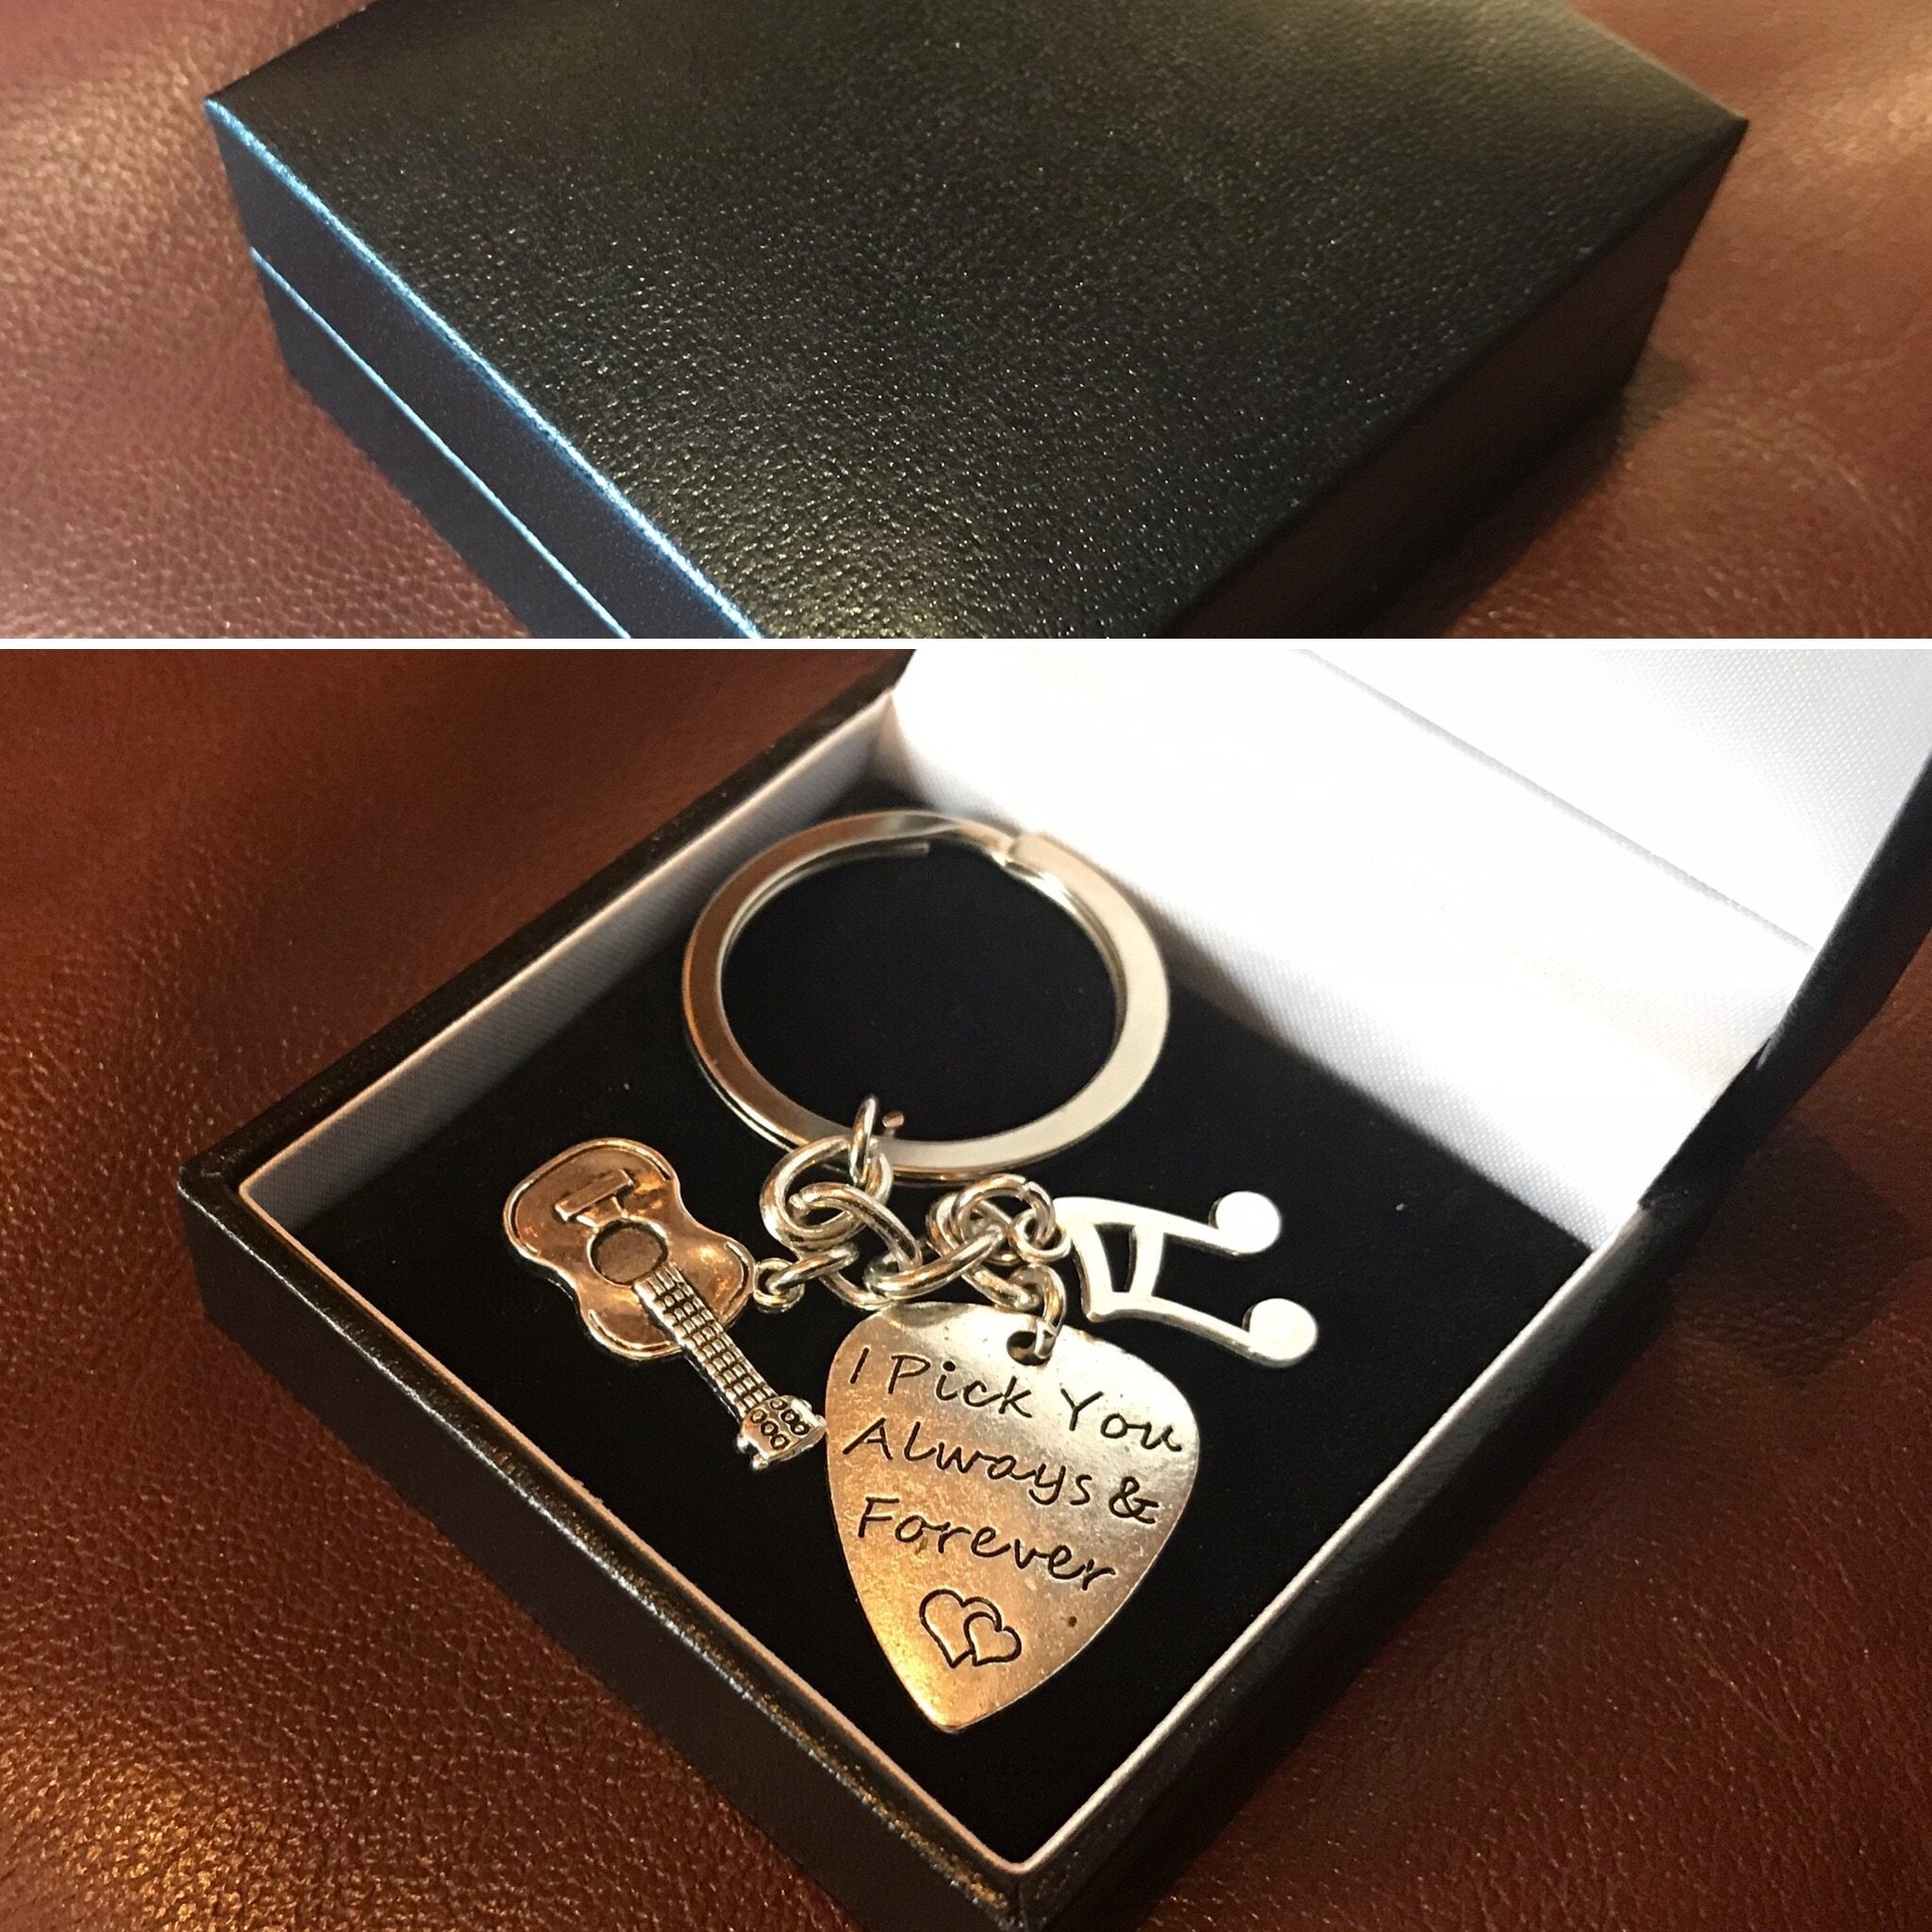 SMJ Hand Made Guitar Pick Keyring & Gift Box. Beautiful Guitar Gift (£1 Goes to Butterfly Conservation), Accessory for sale at Richards Guitars.